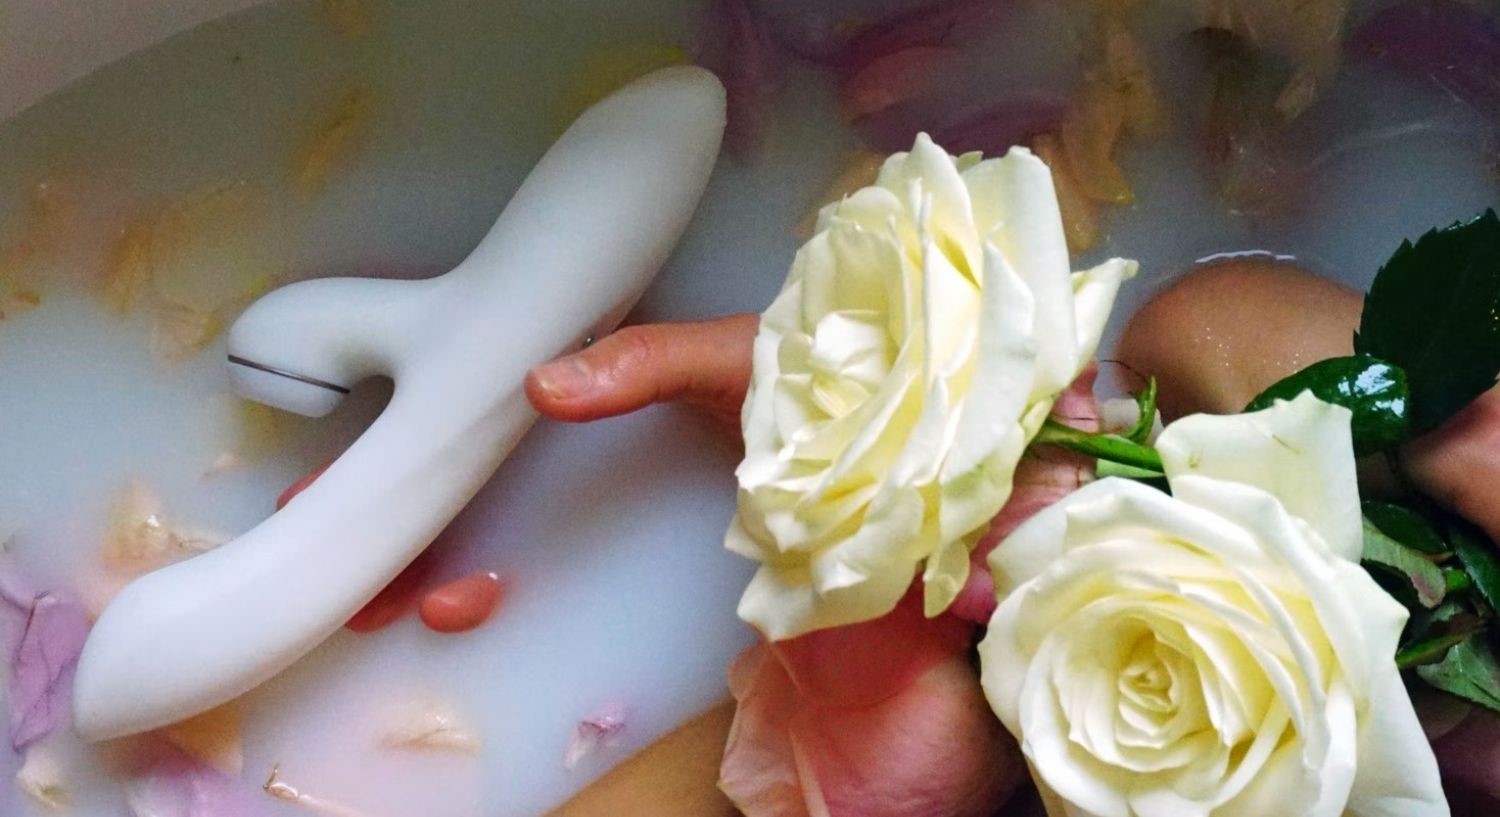 A rabbit vibrator in a bathtub with flowers